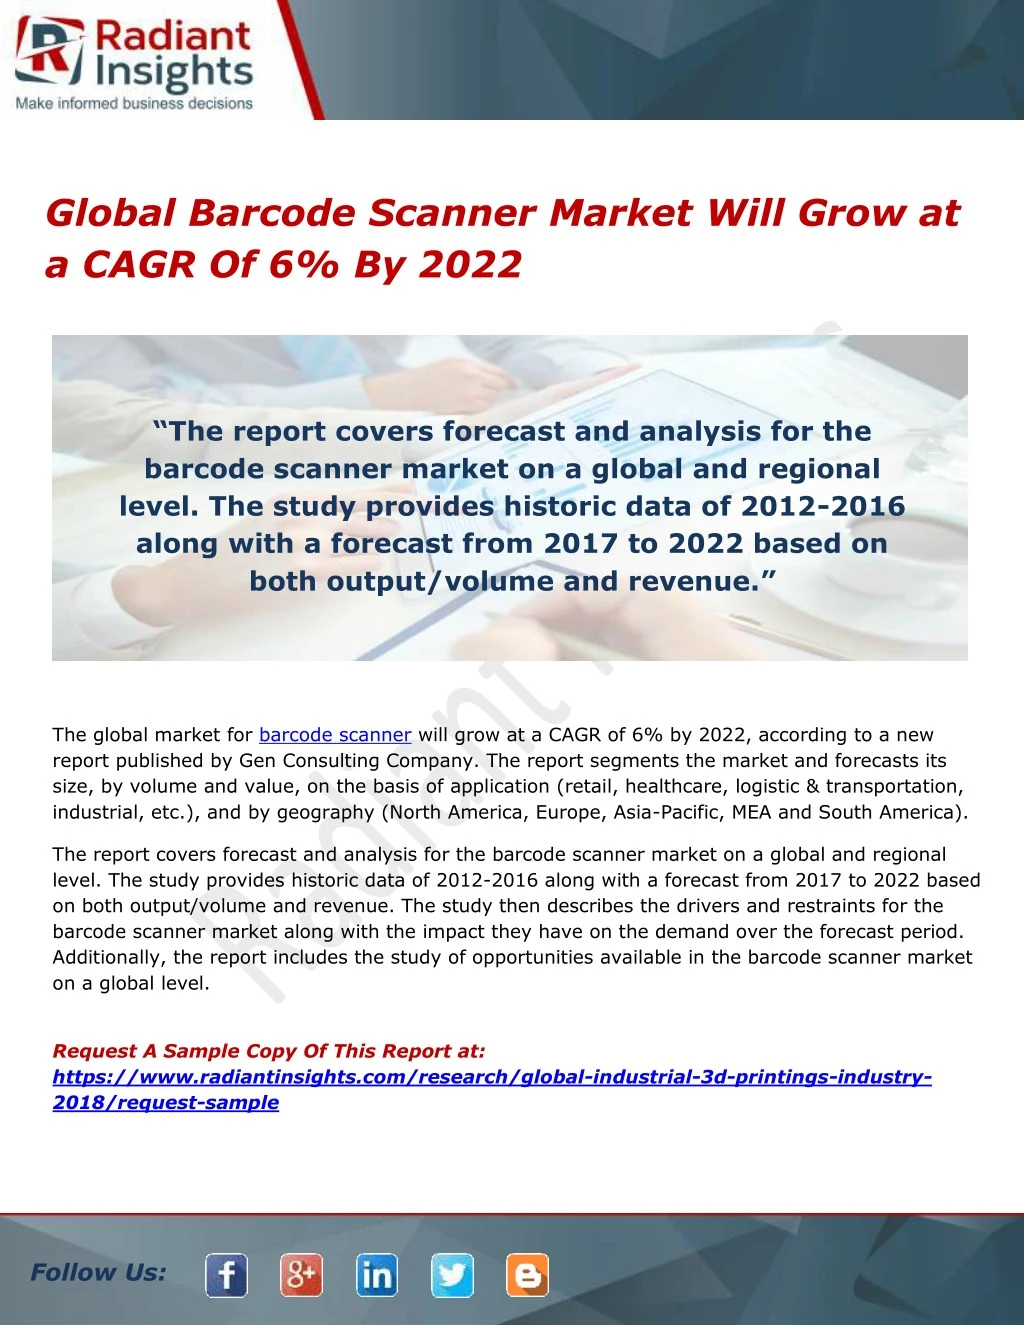 global barcode scanner market will grow at a cagr